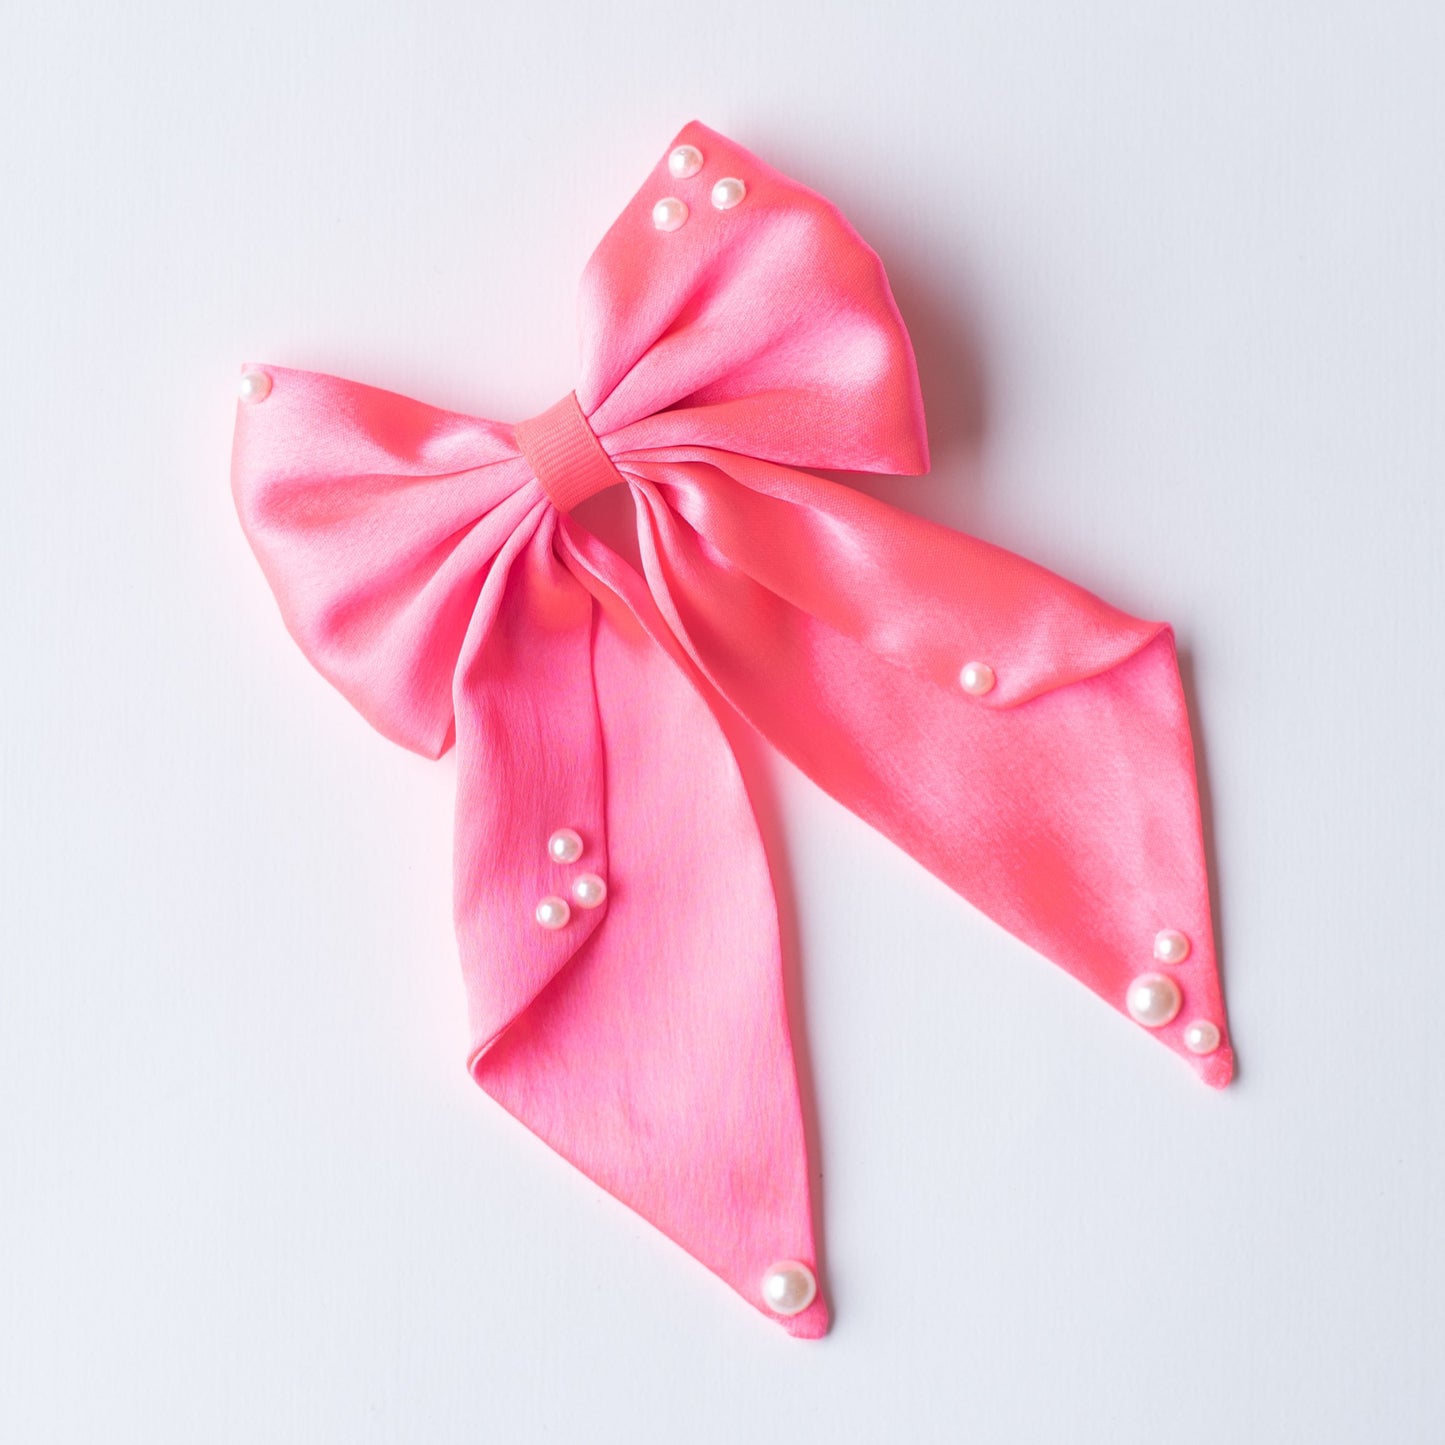 Big fancy satin bow on alligator clip embellished with pearls - Fluorescent Pink